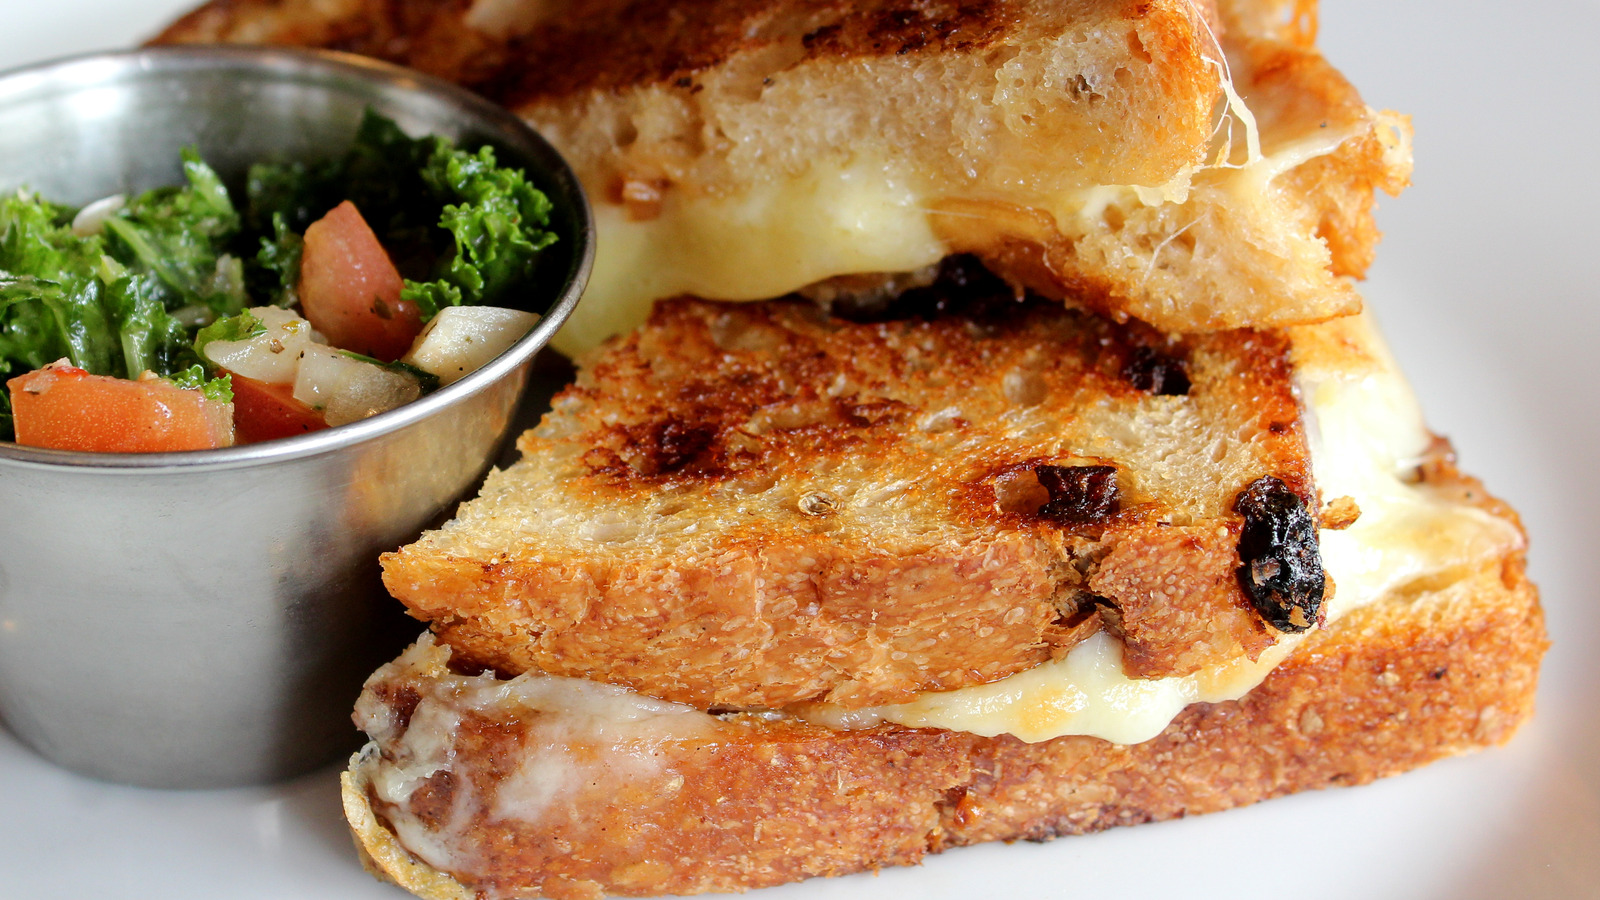 Replace Cinnamon Raisin Bread with a Zesty Brie Grilled Cheese